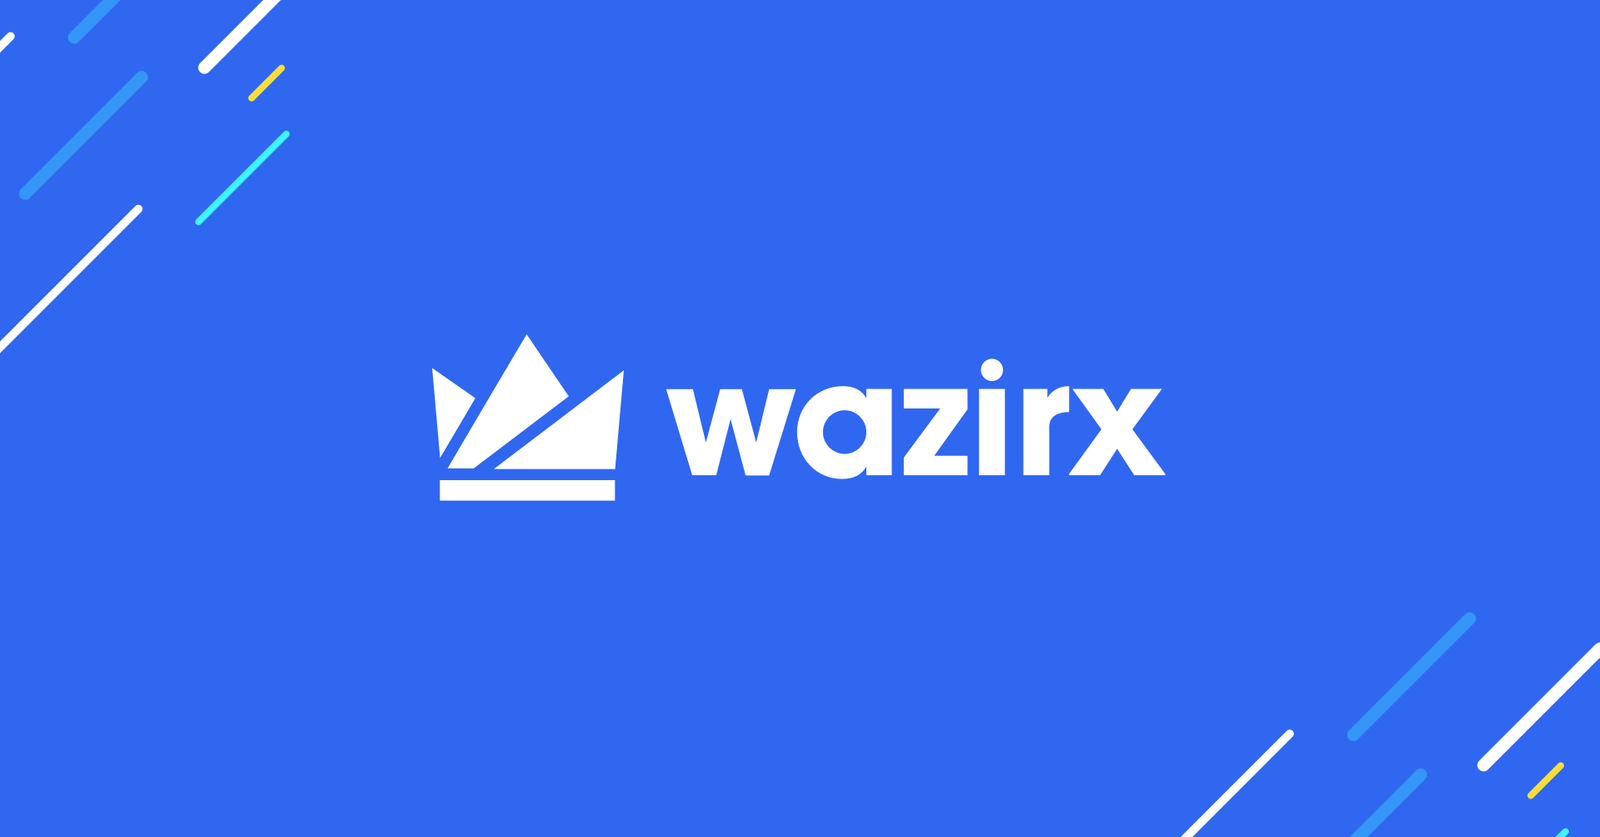 What Is WazirX's Crypto Price Prediction in 2021?